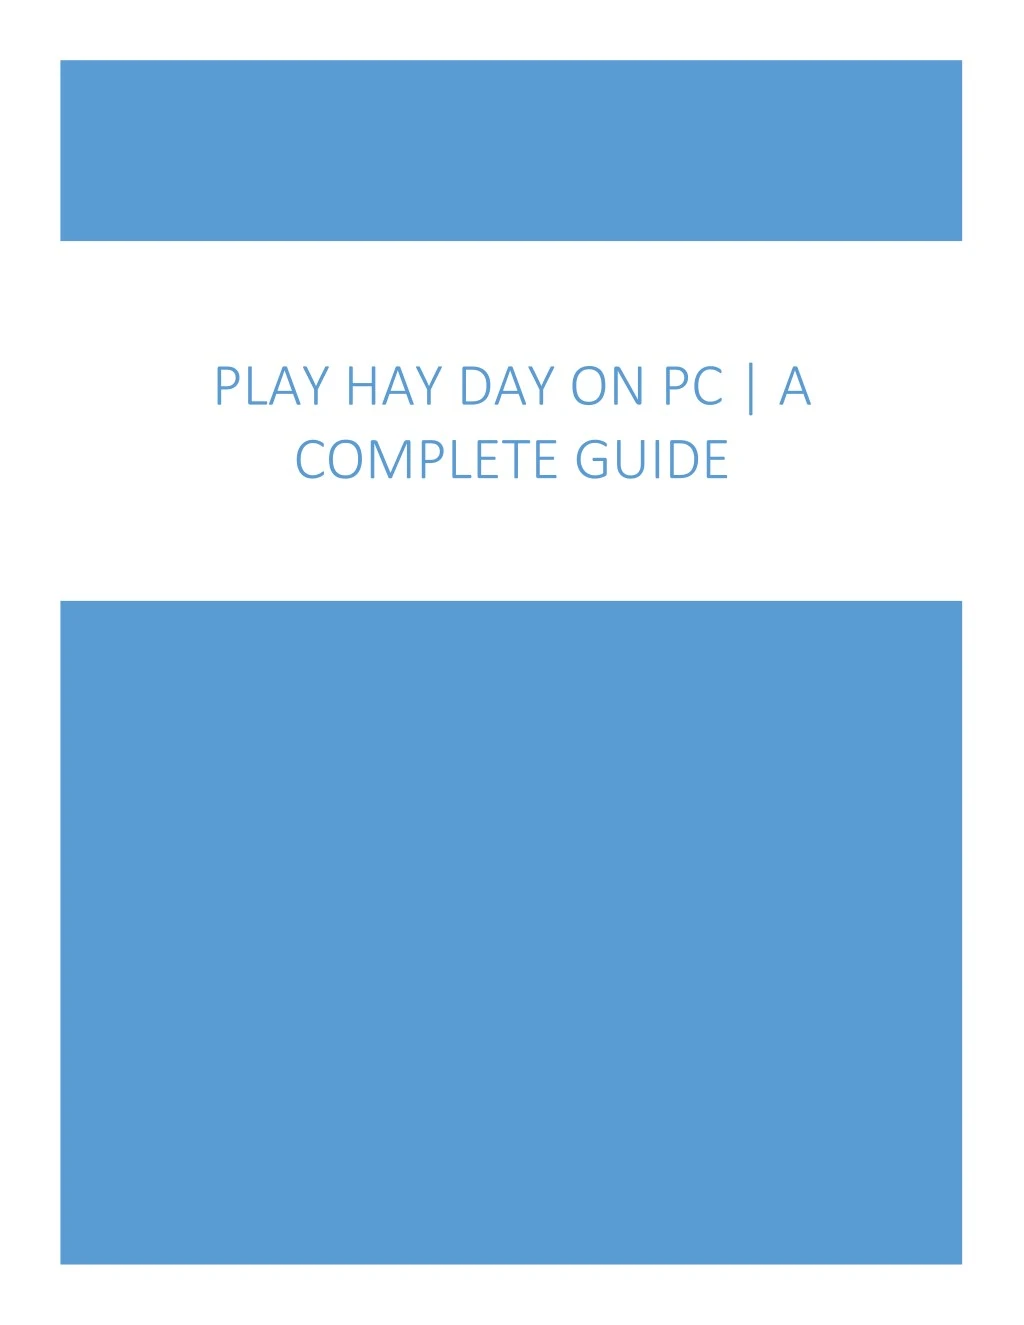 play hay day on pc a complete guide